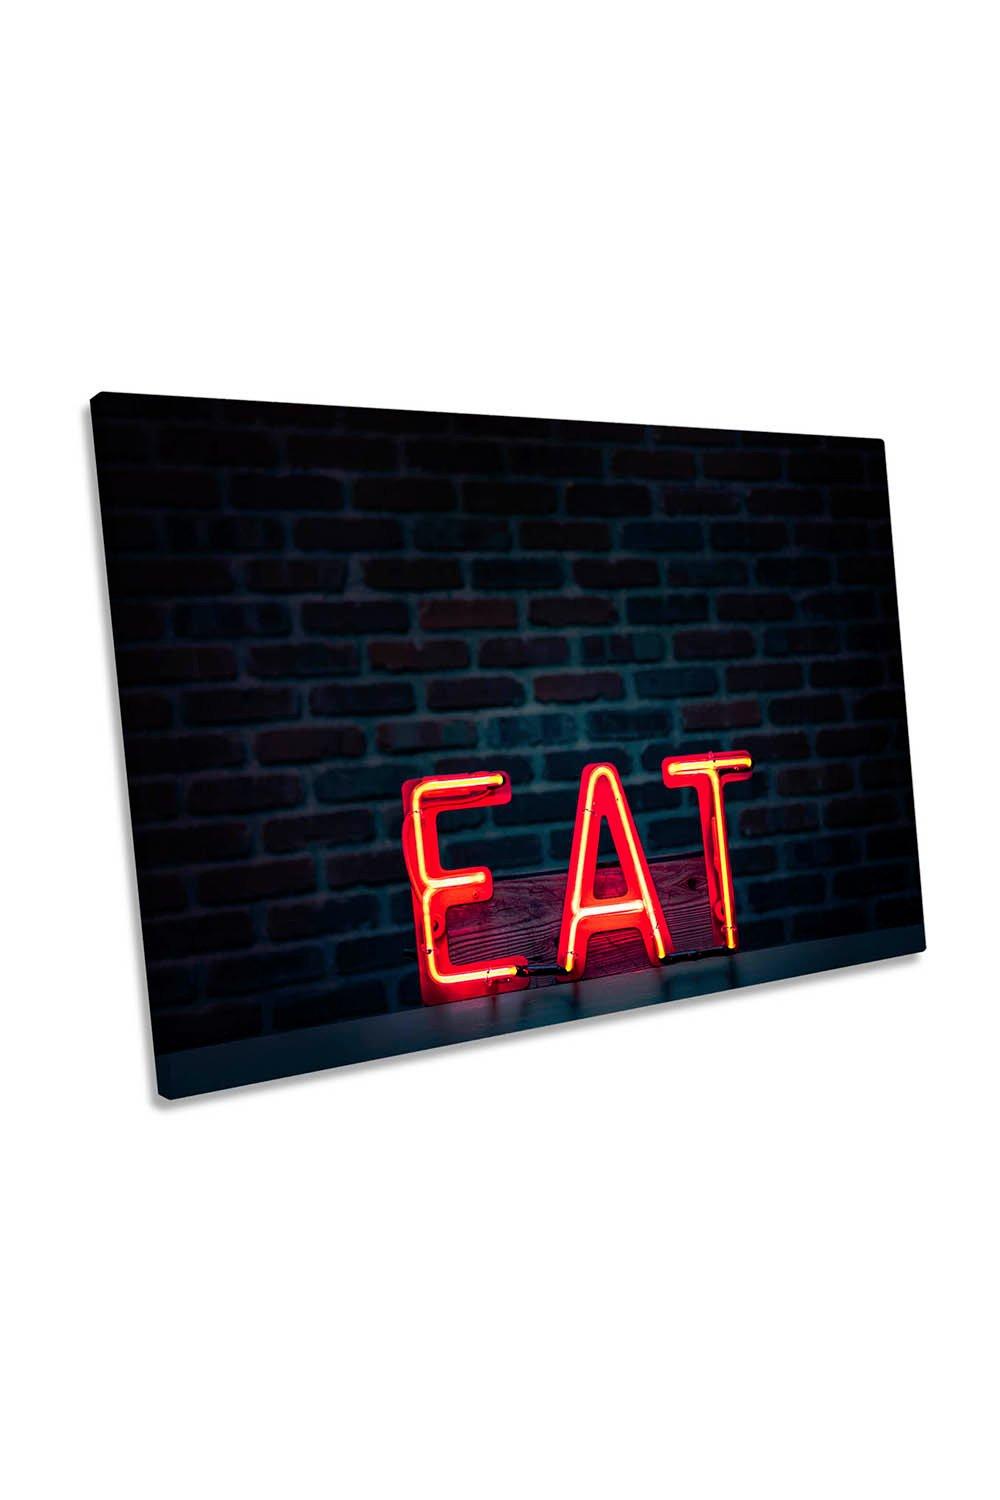 Eat in Neon Sign Canvas Wall Art Picture Print